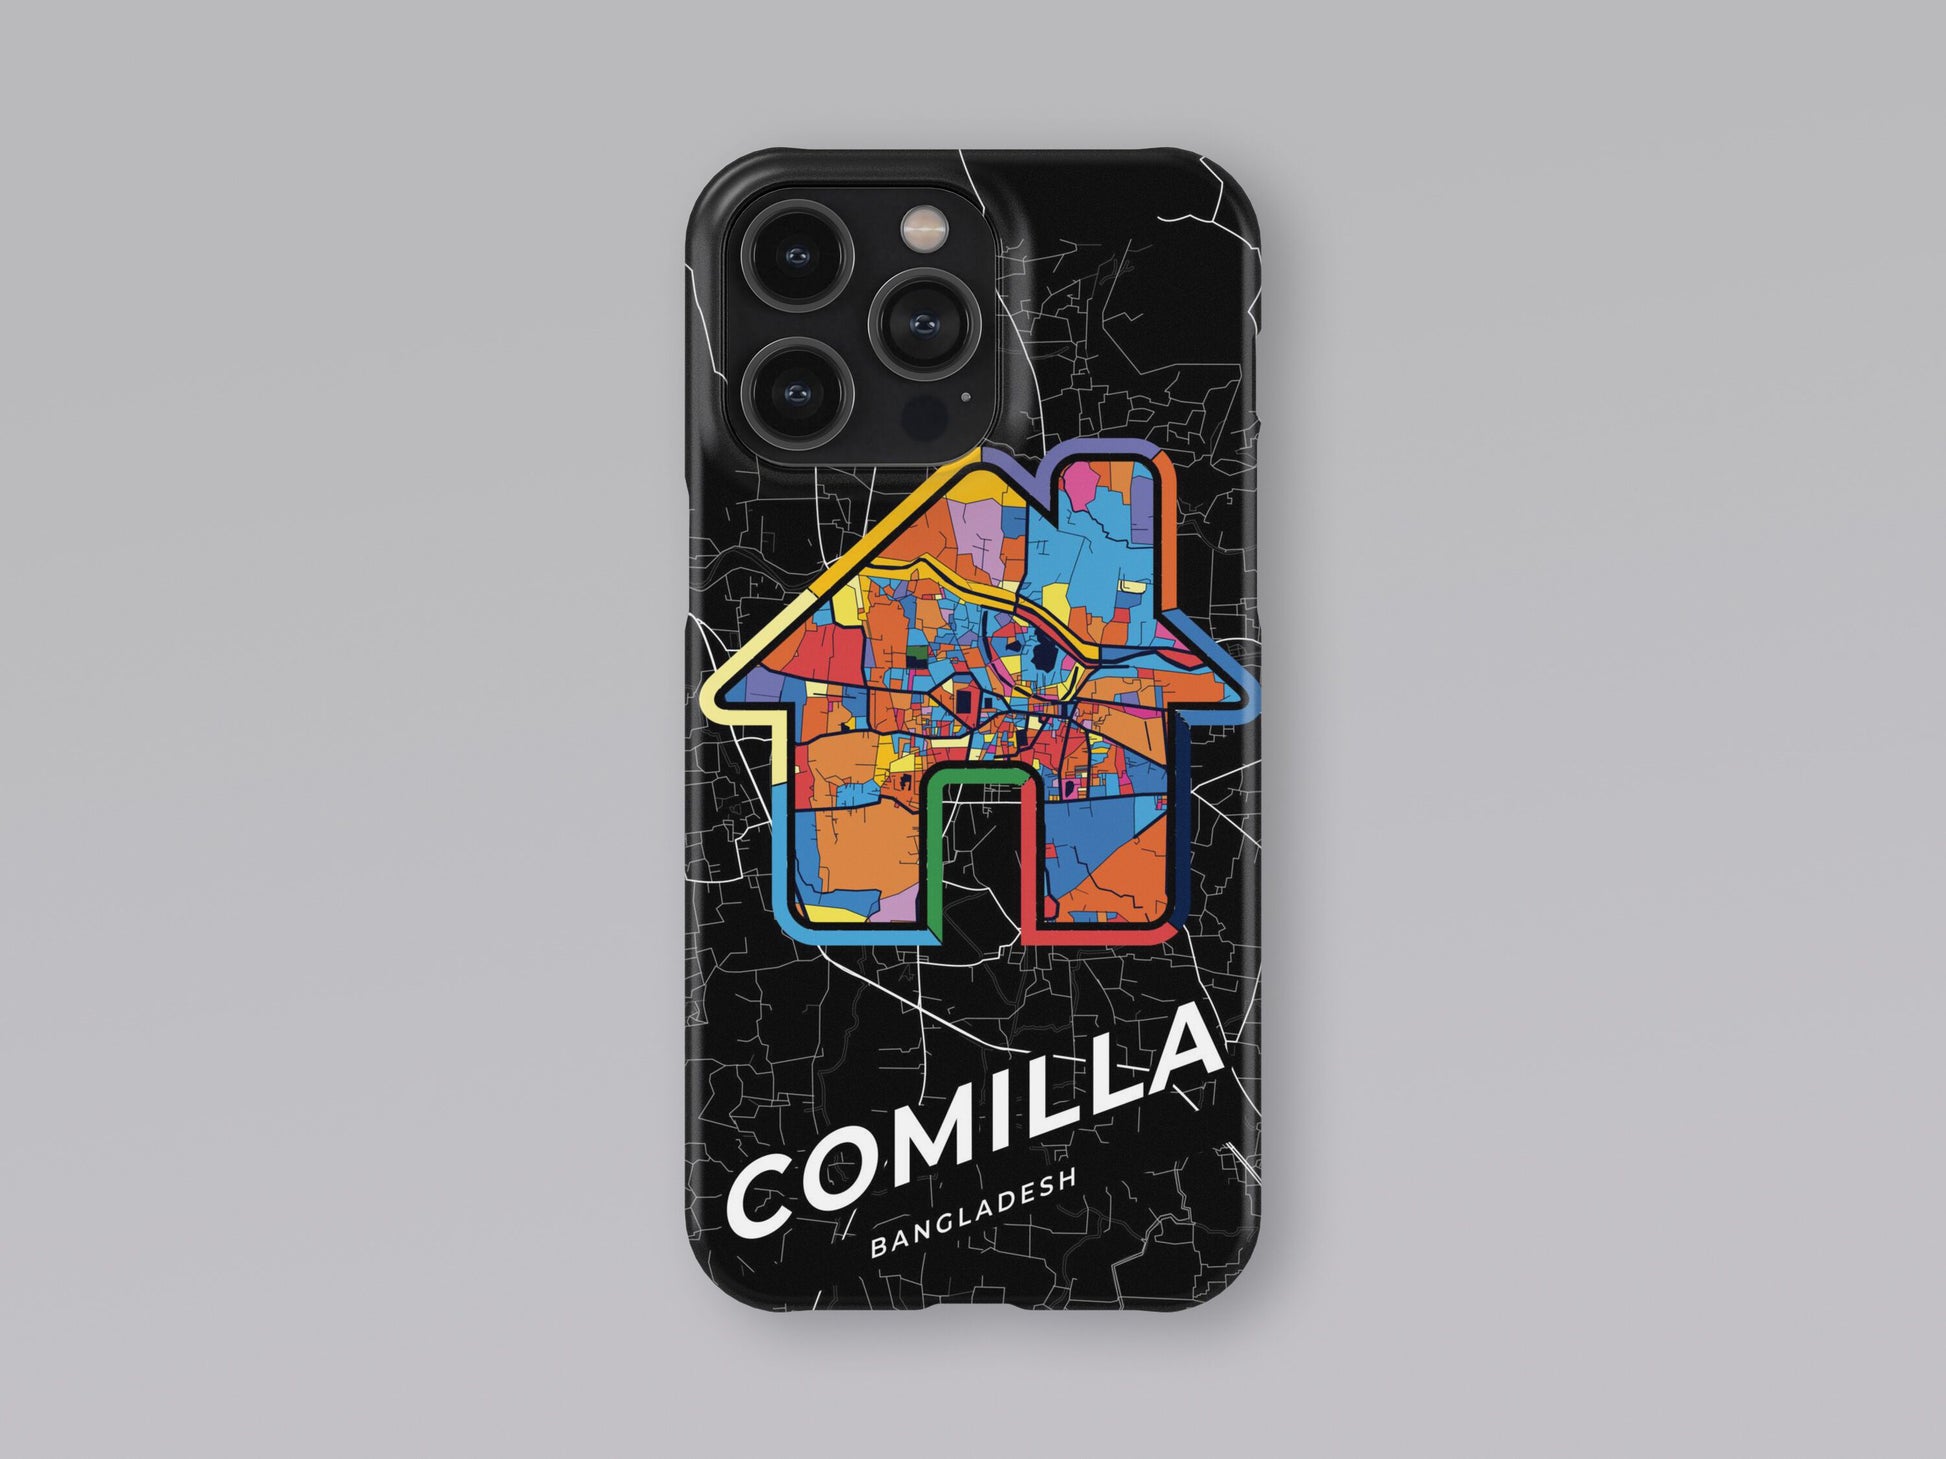 Comilla Bangladesh slim phone case with colorful icon. Birthday, wedding or housewarming gift. Couple match cases. 3